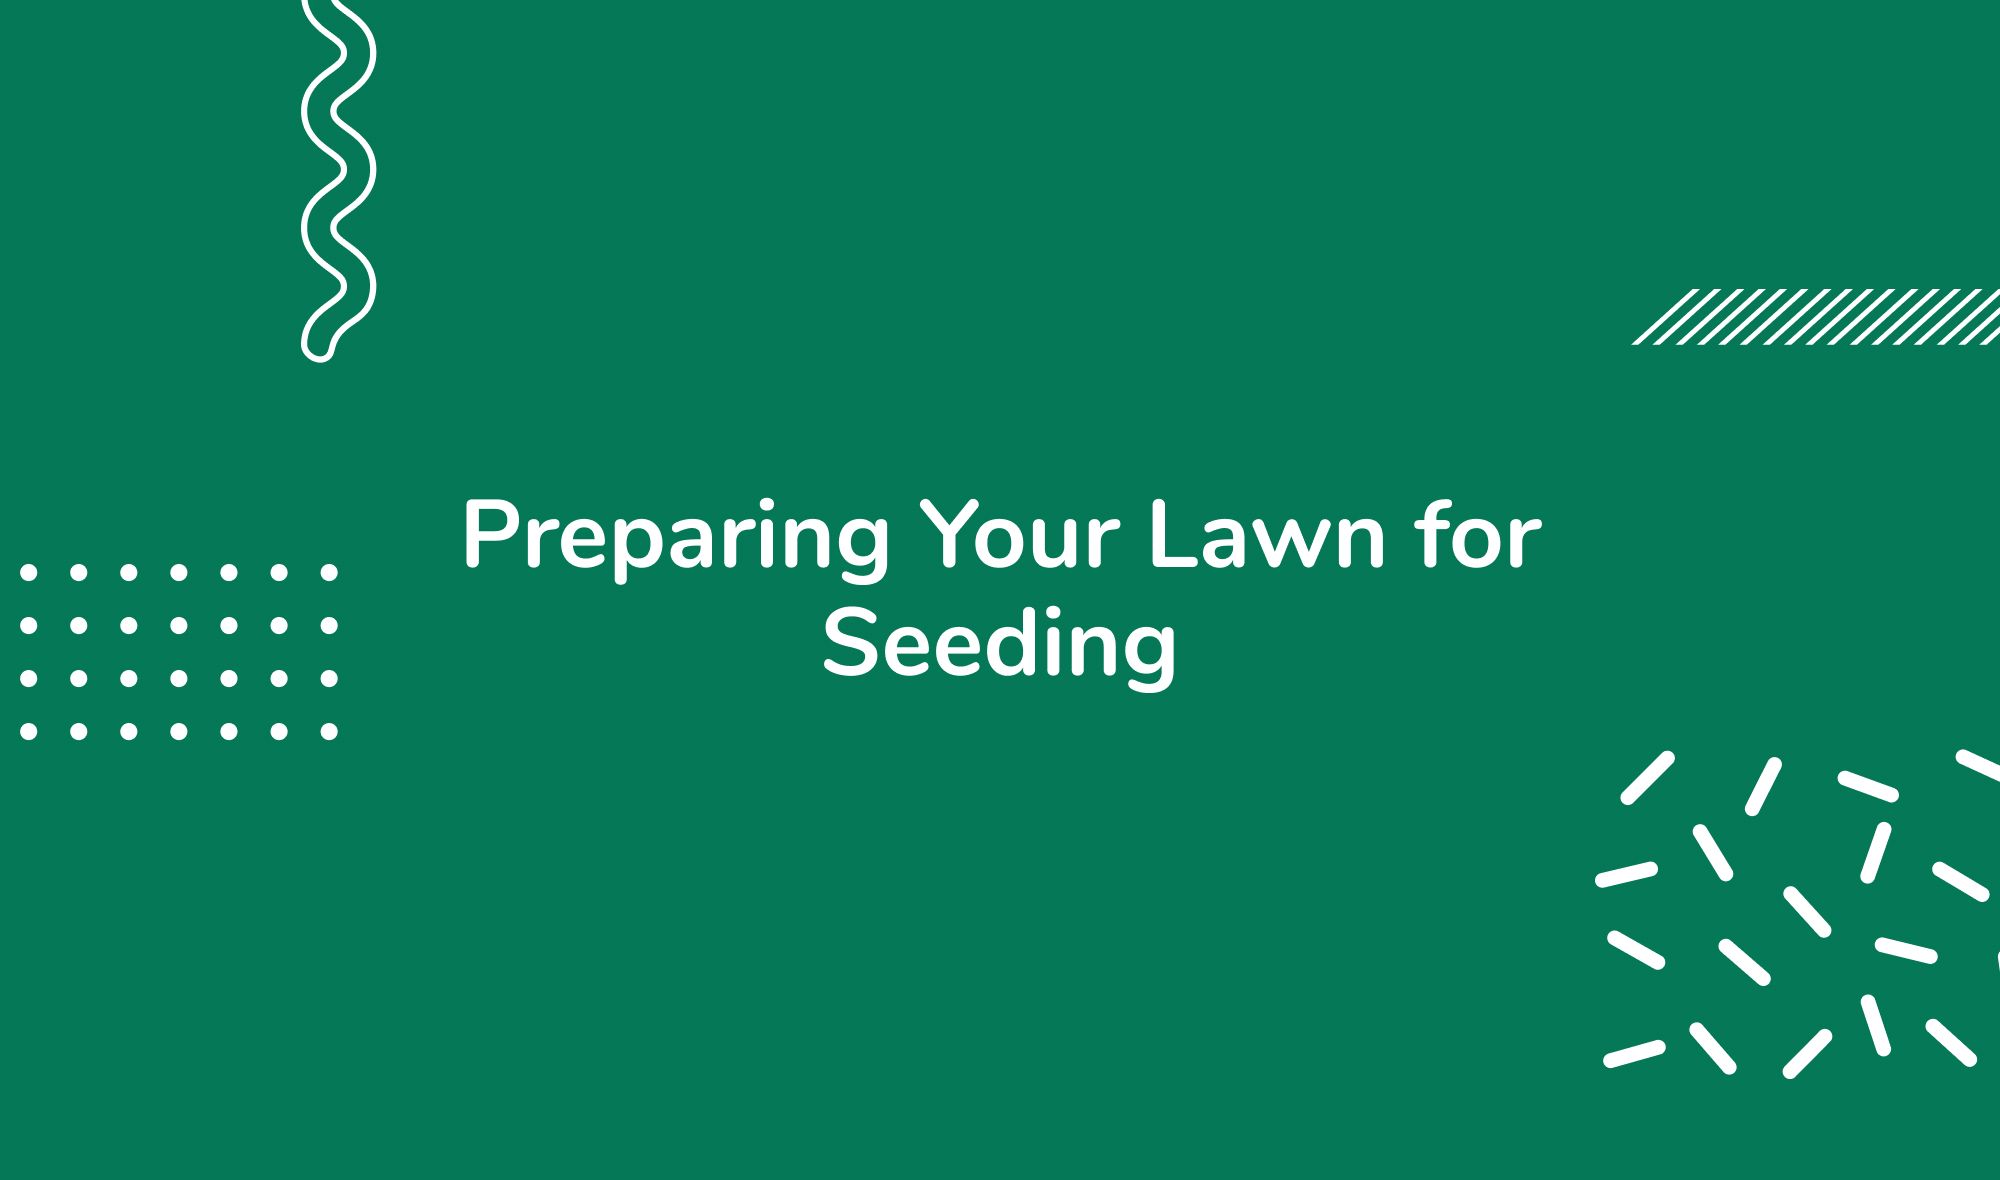 Preparing Your Lawn for Seeding